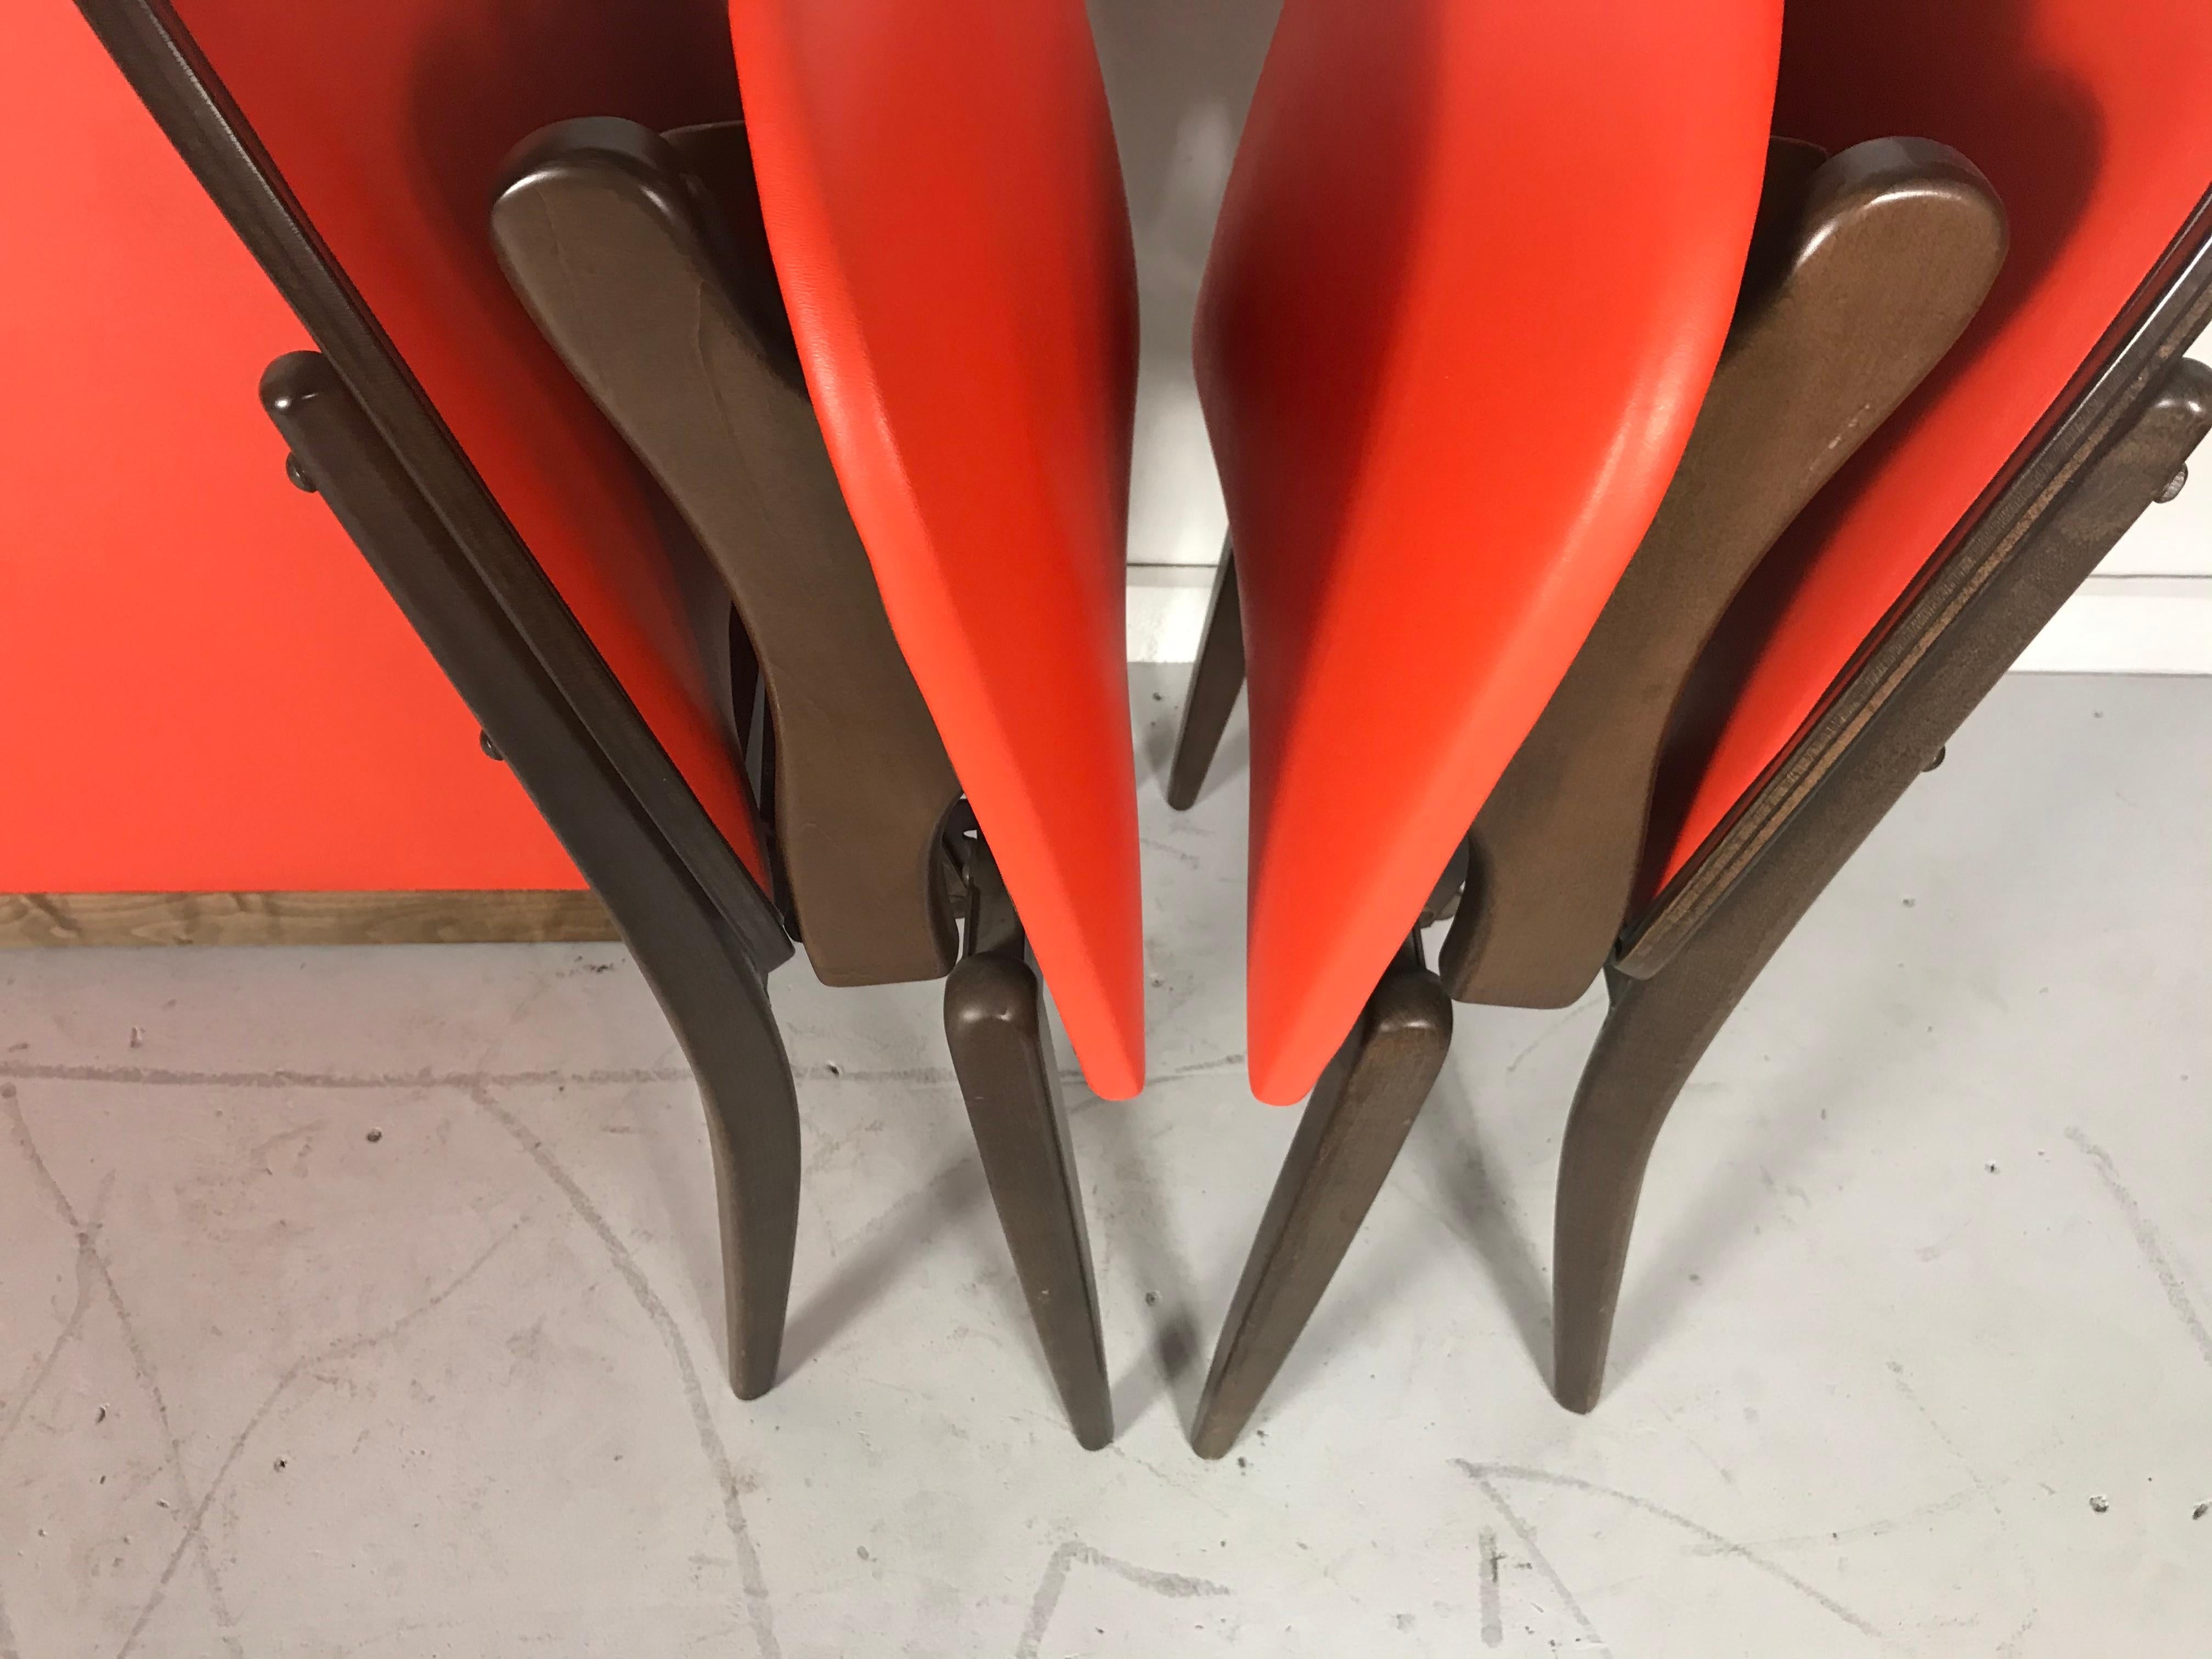 Mid-20th Century Elegant Stylized Folding Table and Chairs Mfg. by Stakmore Furniture Co.